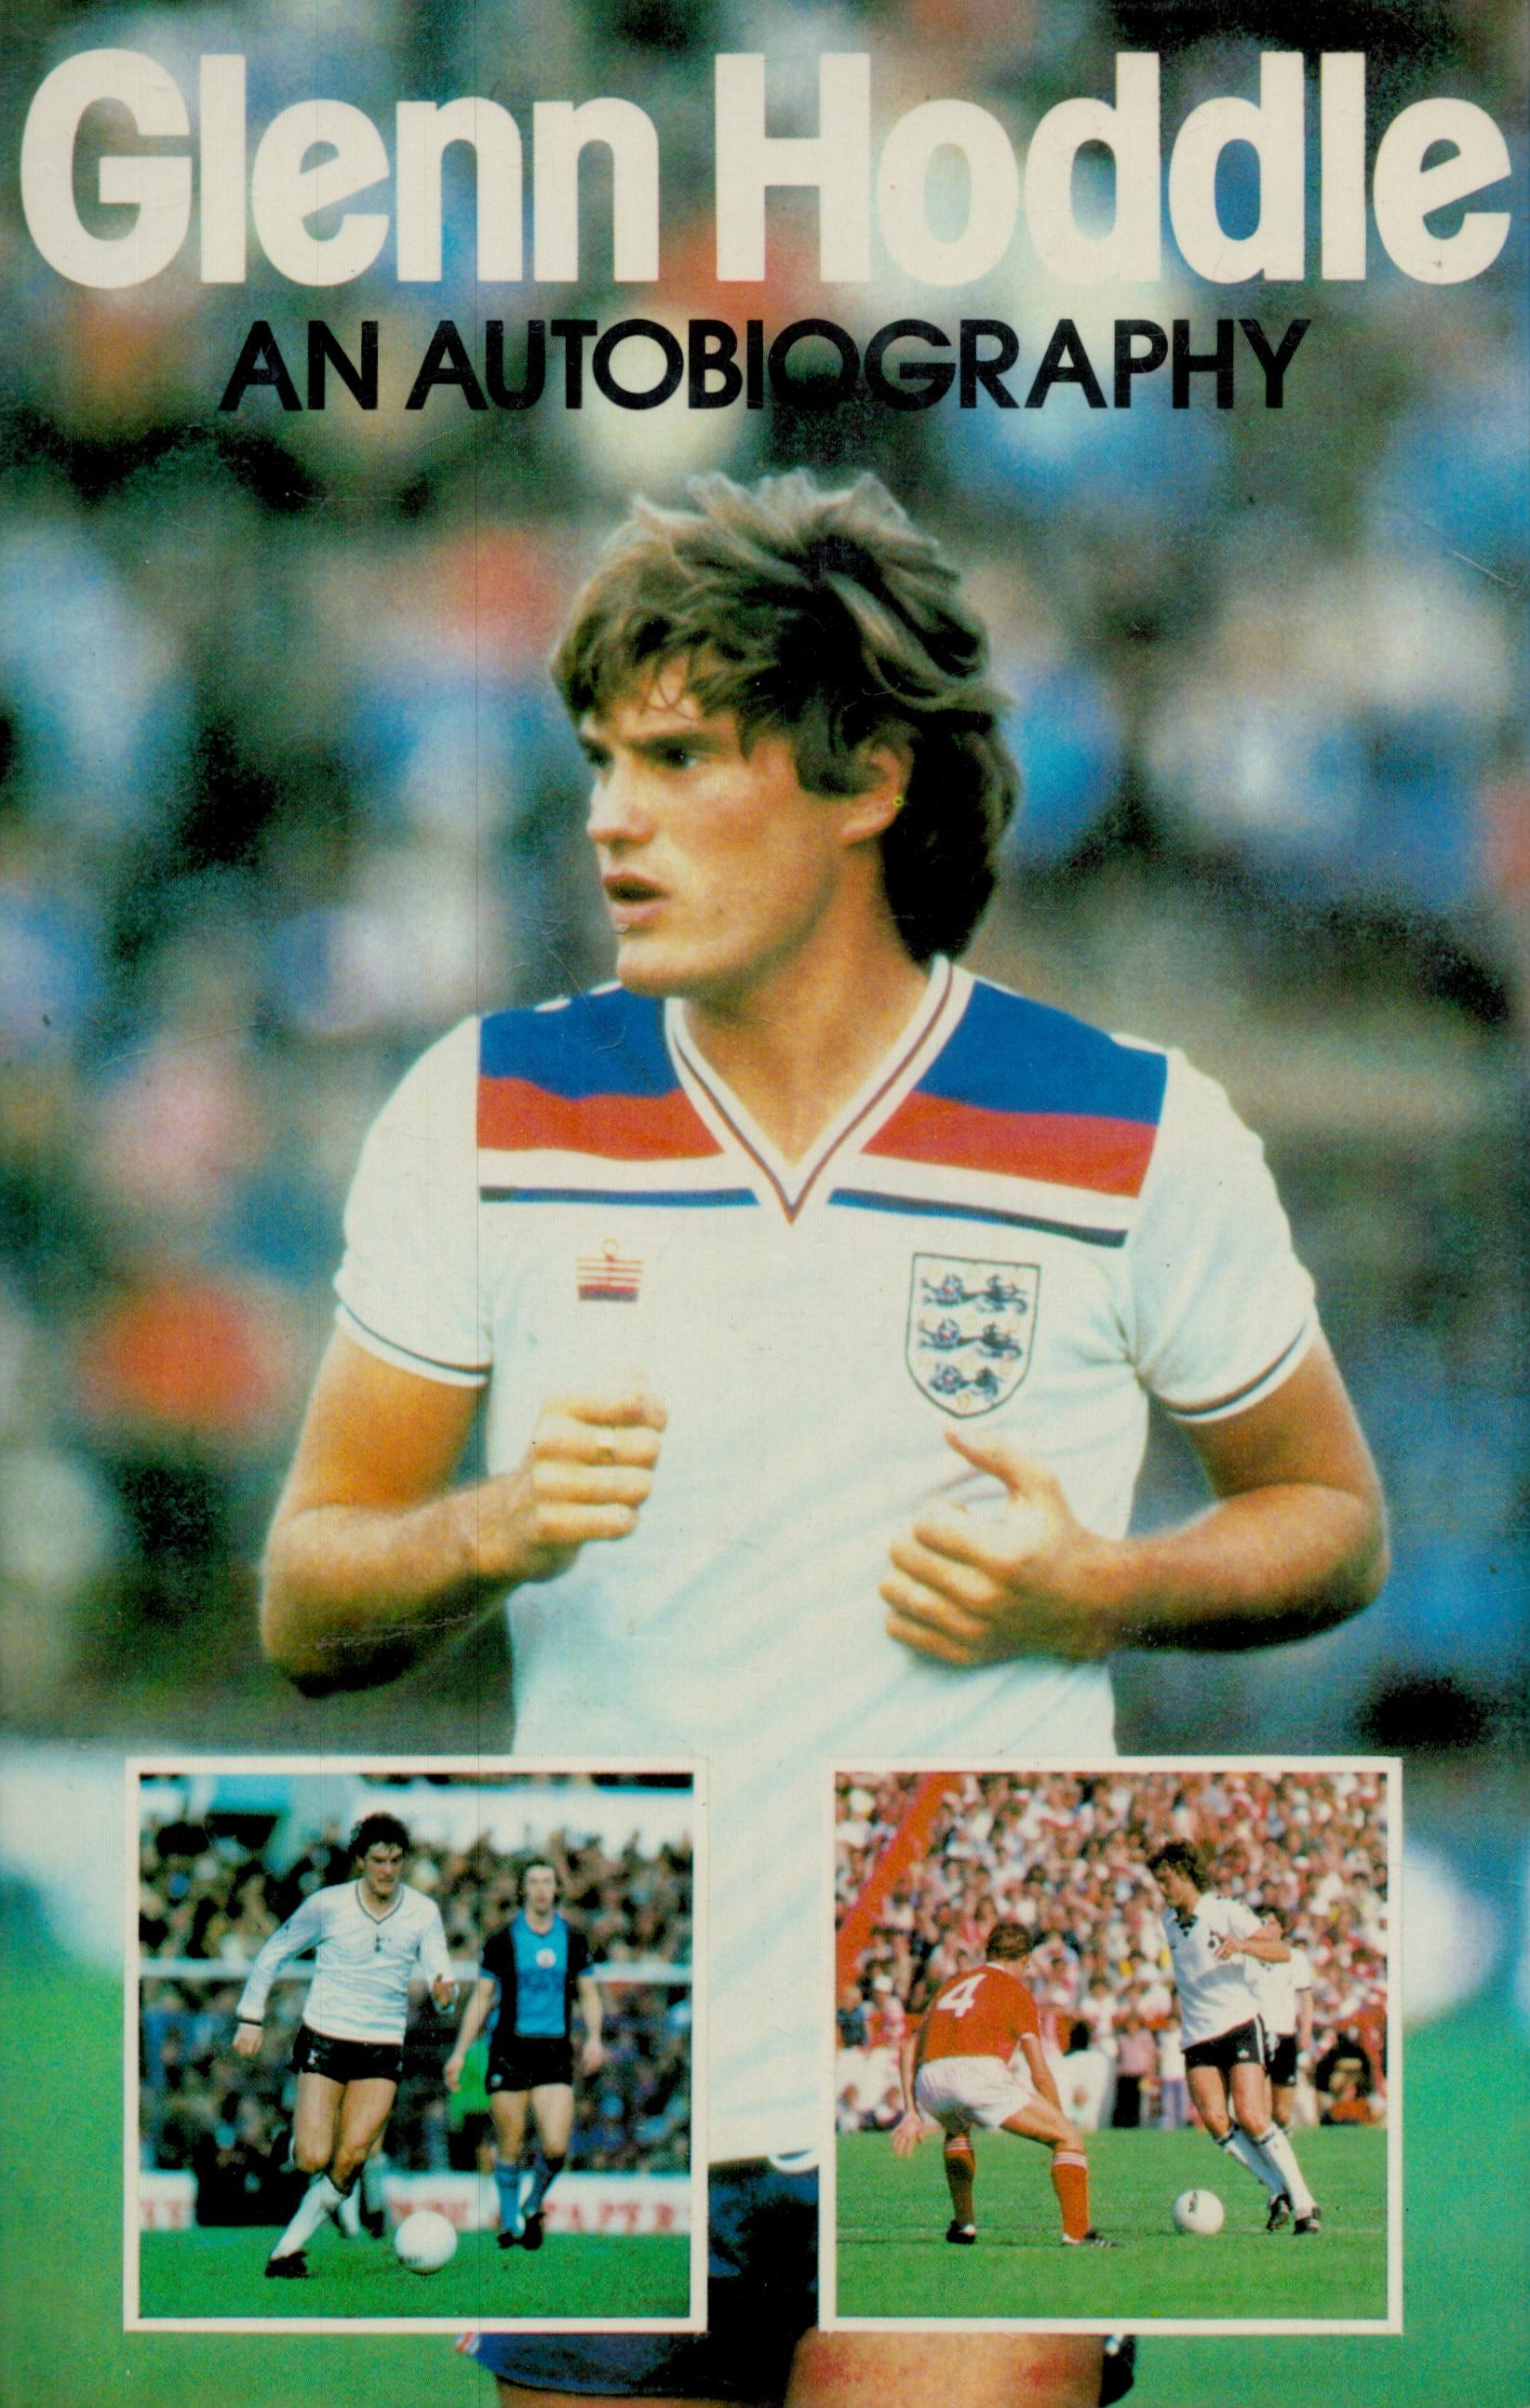 Glenn Hoddle signed Hardback book. Glenn Hoddle and Autobiography, 145 pages. Good Condition. All